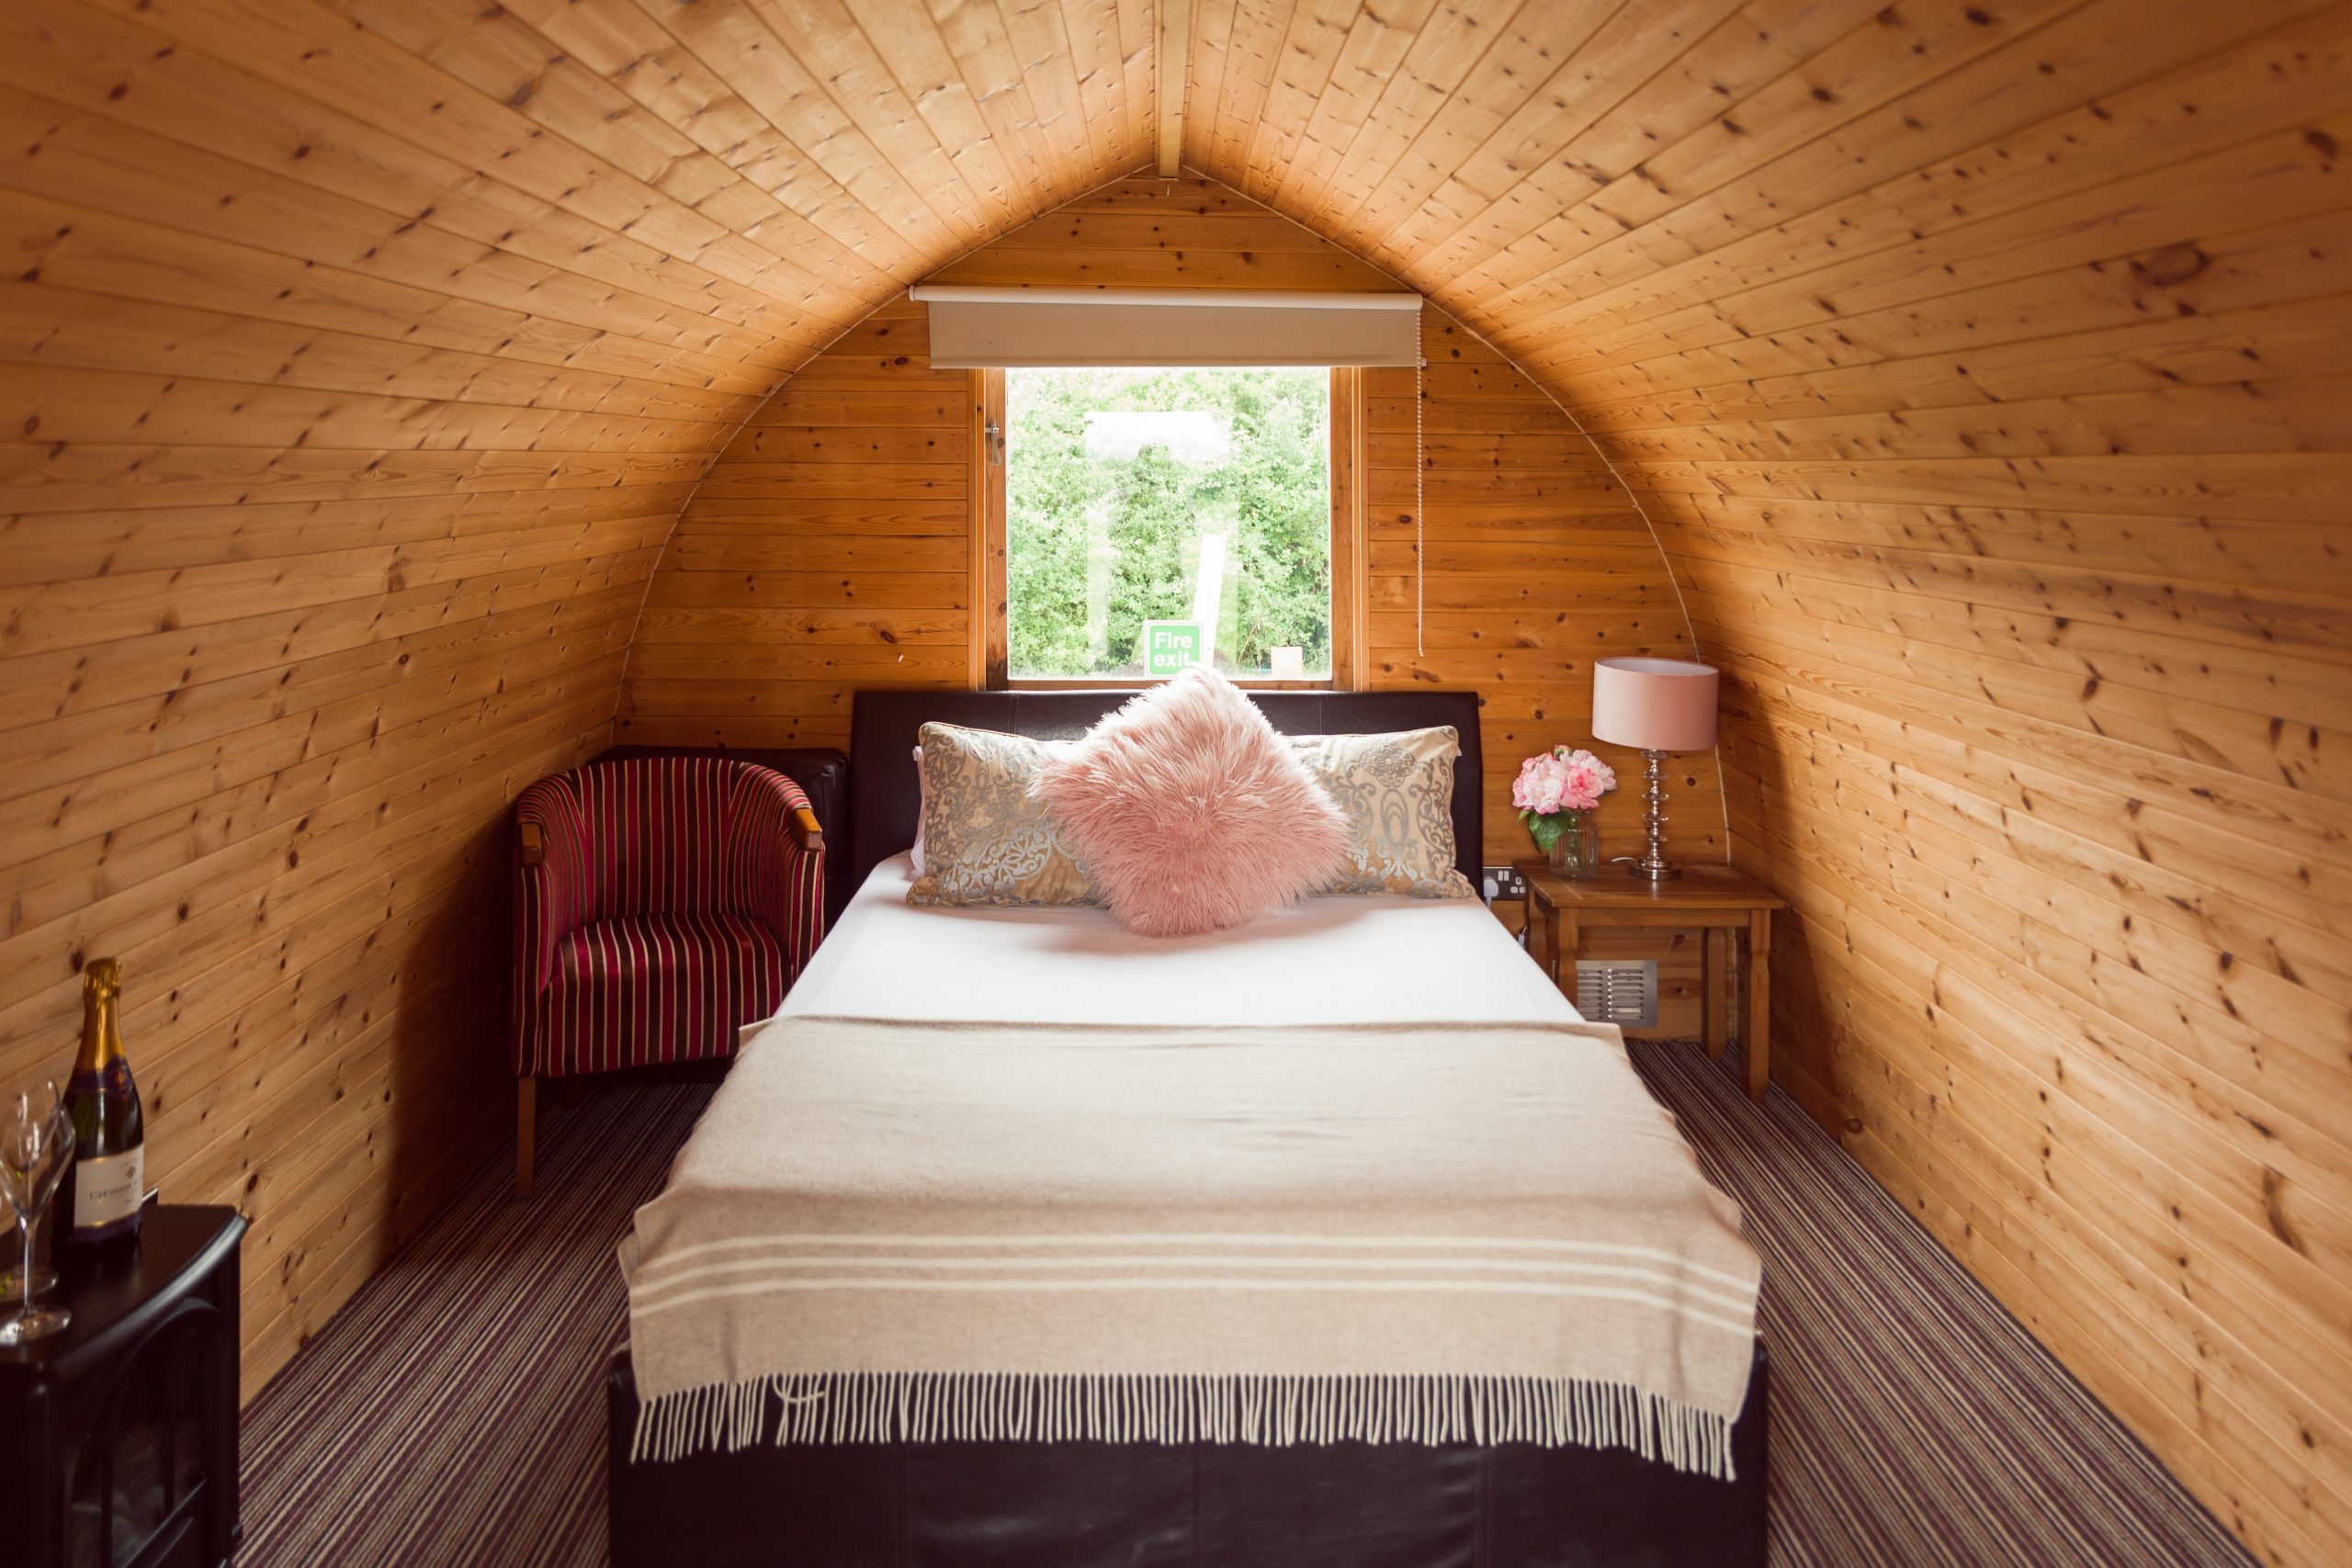 Pitch and Canvas | Glamping and Camping in Cheshire | Pod bed